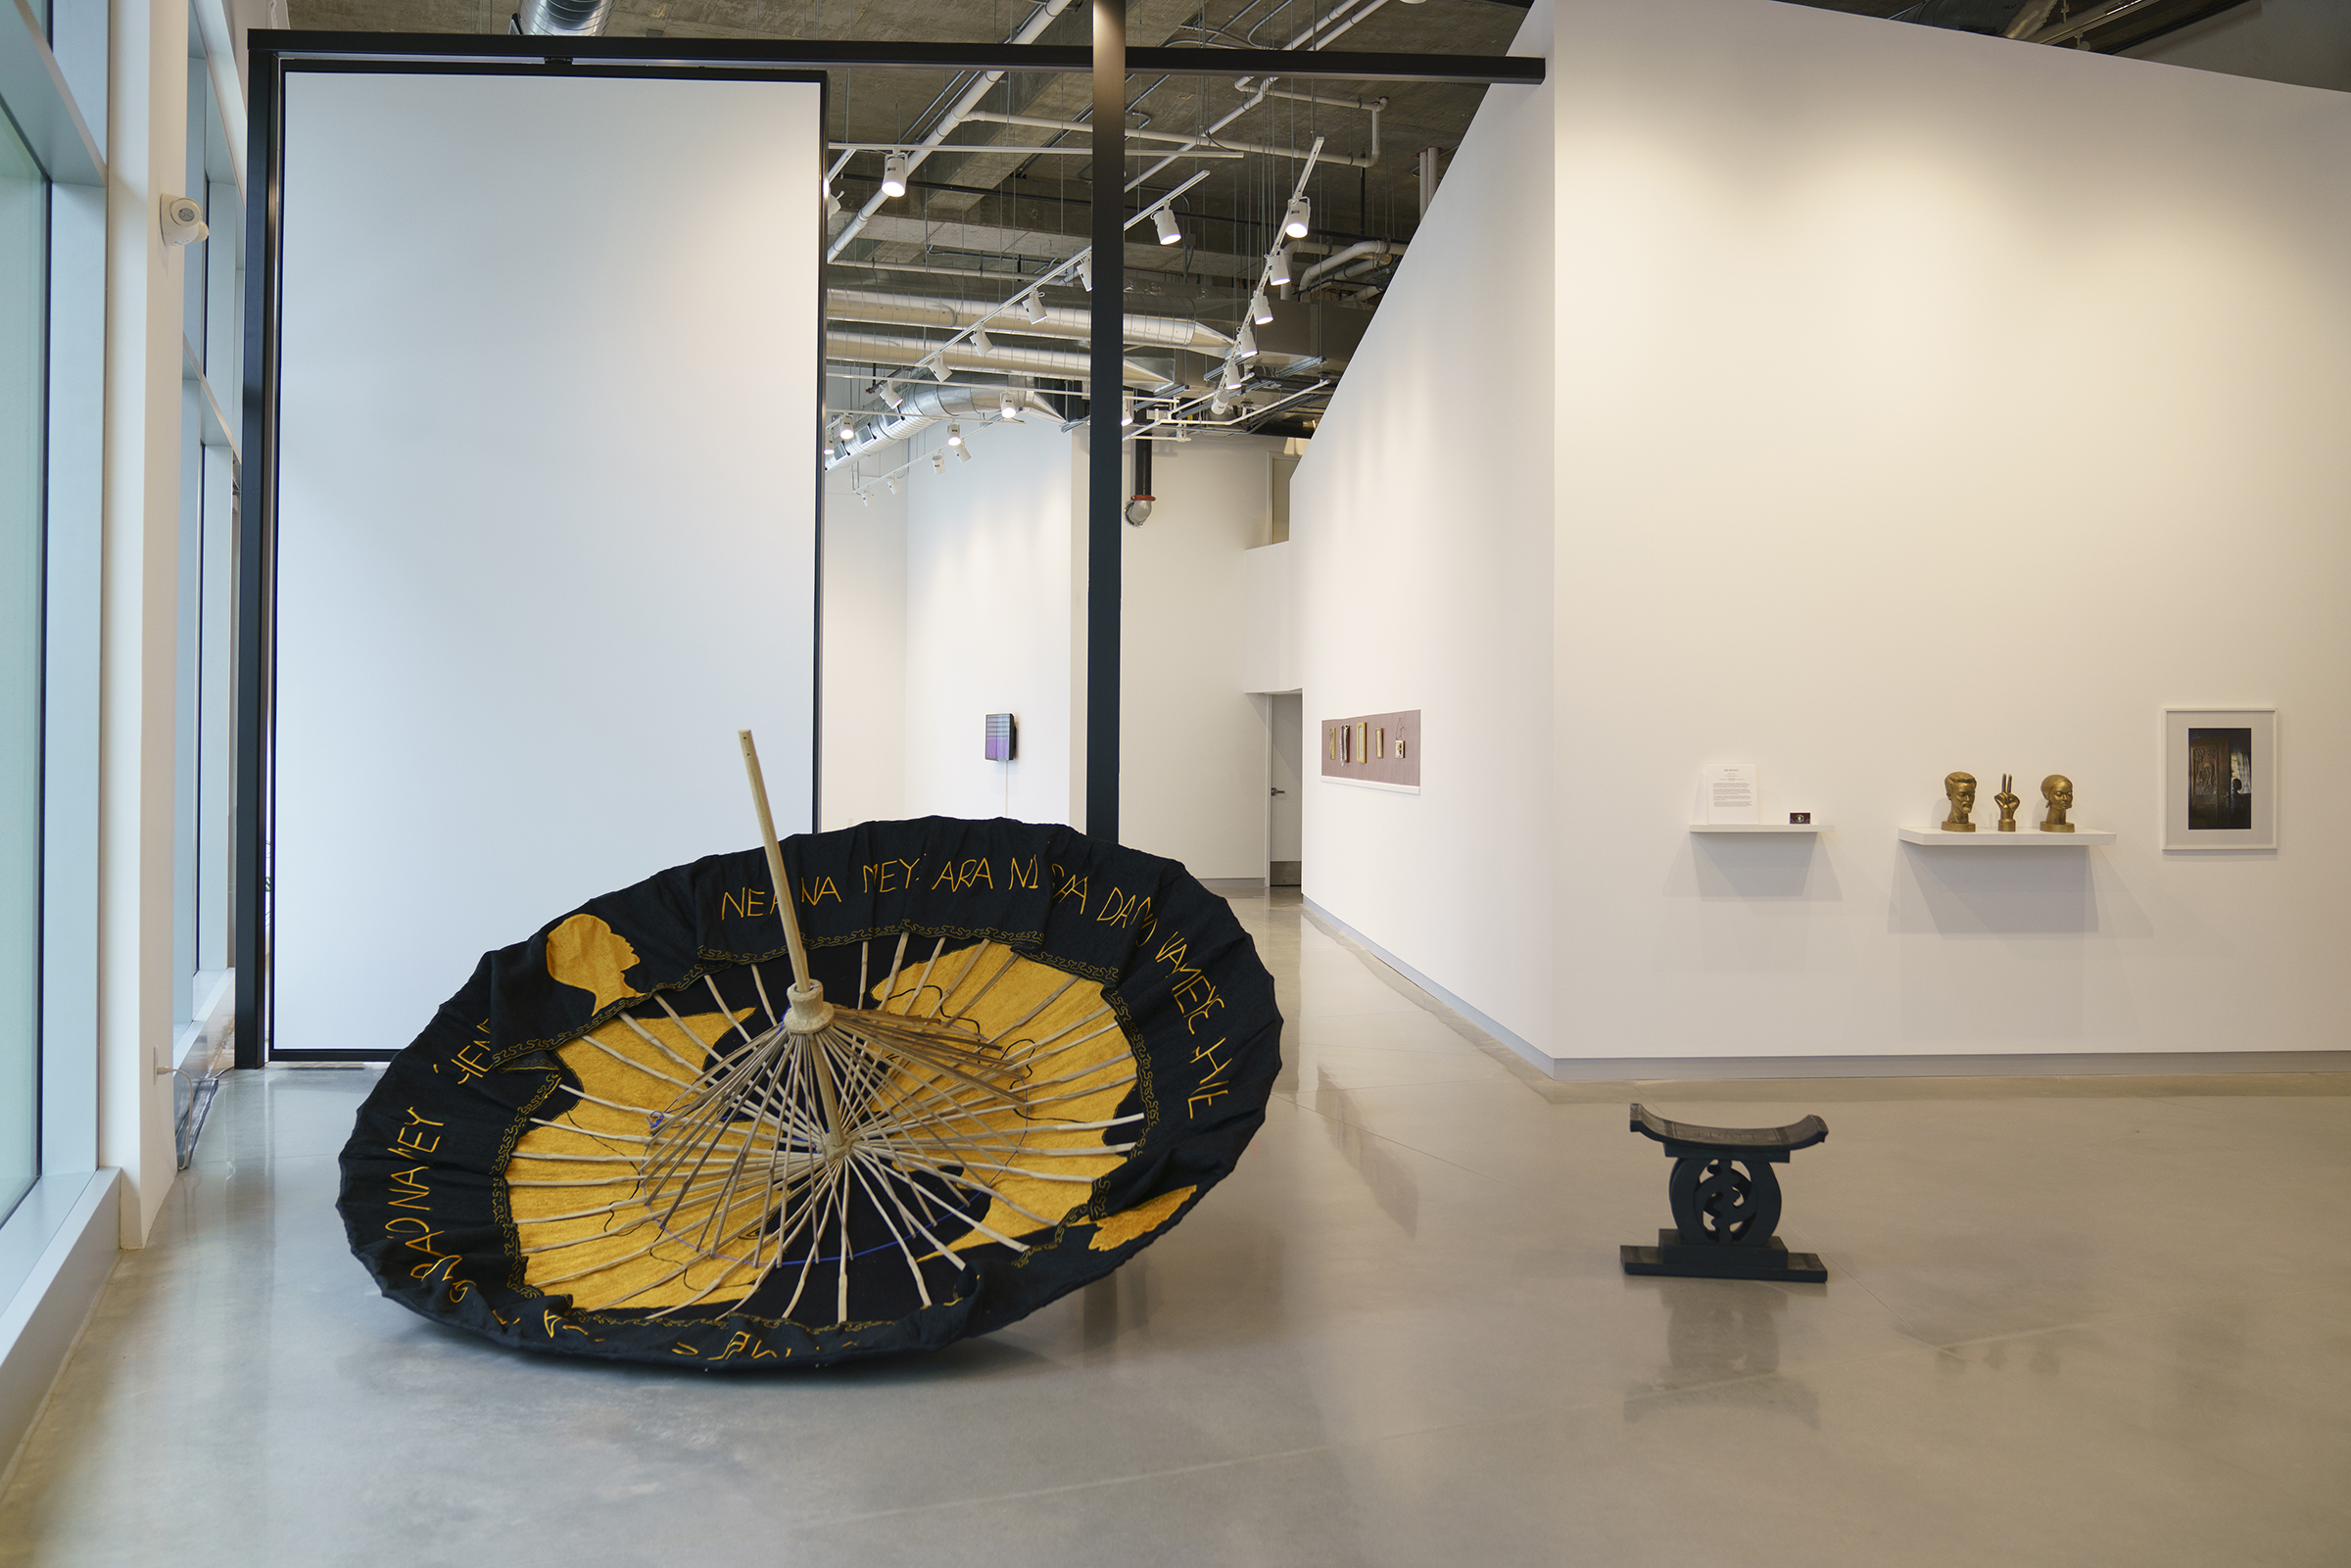 Installation view of Mo Apiafo by Rita Mawuena Benissan at the Arts + Literature Laboratory, photography by Ali Deane.